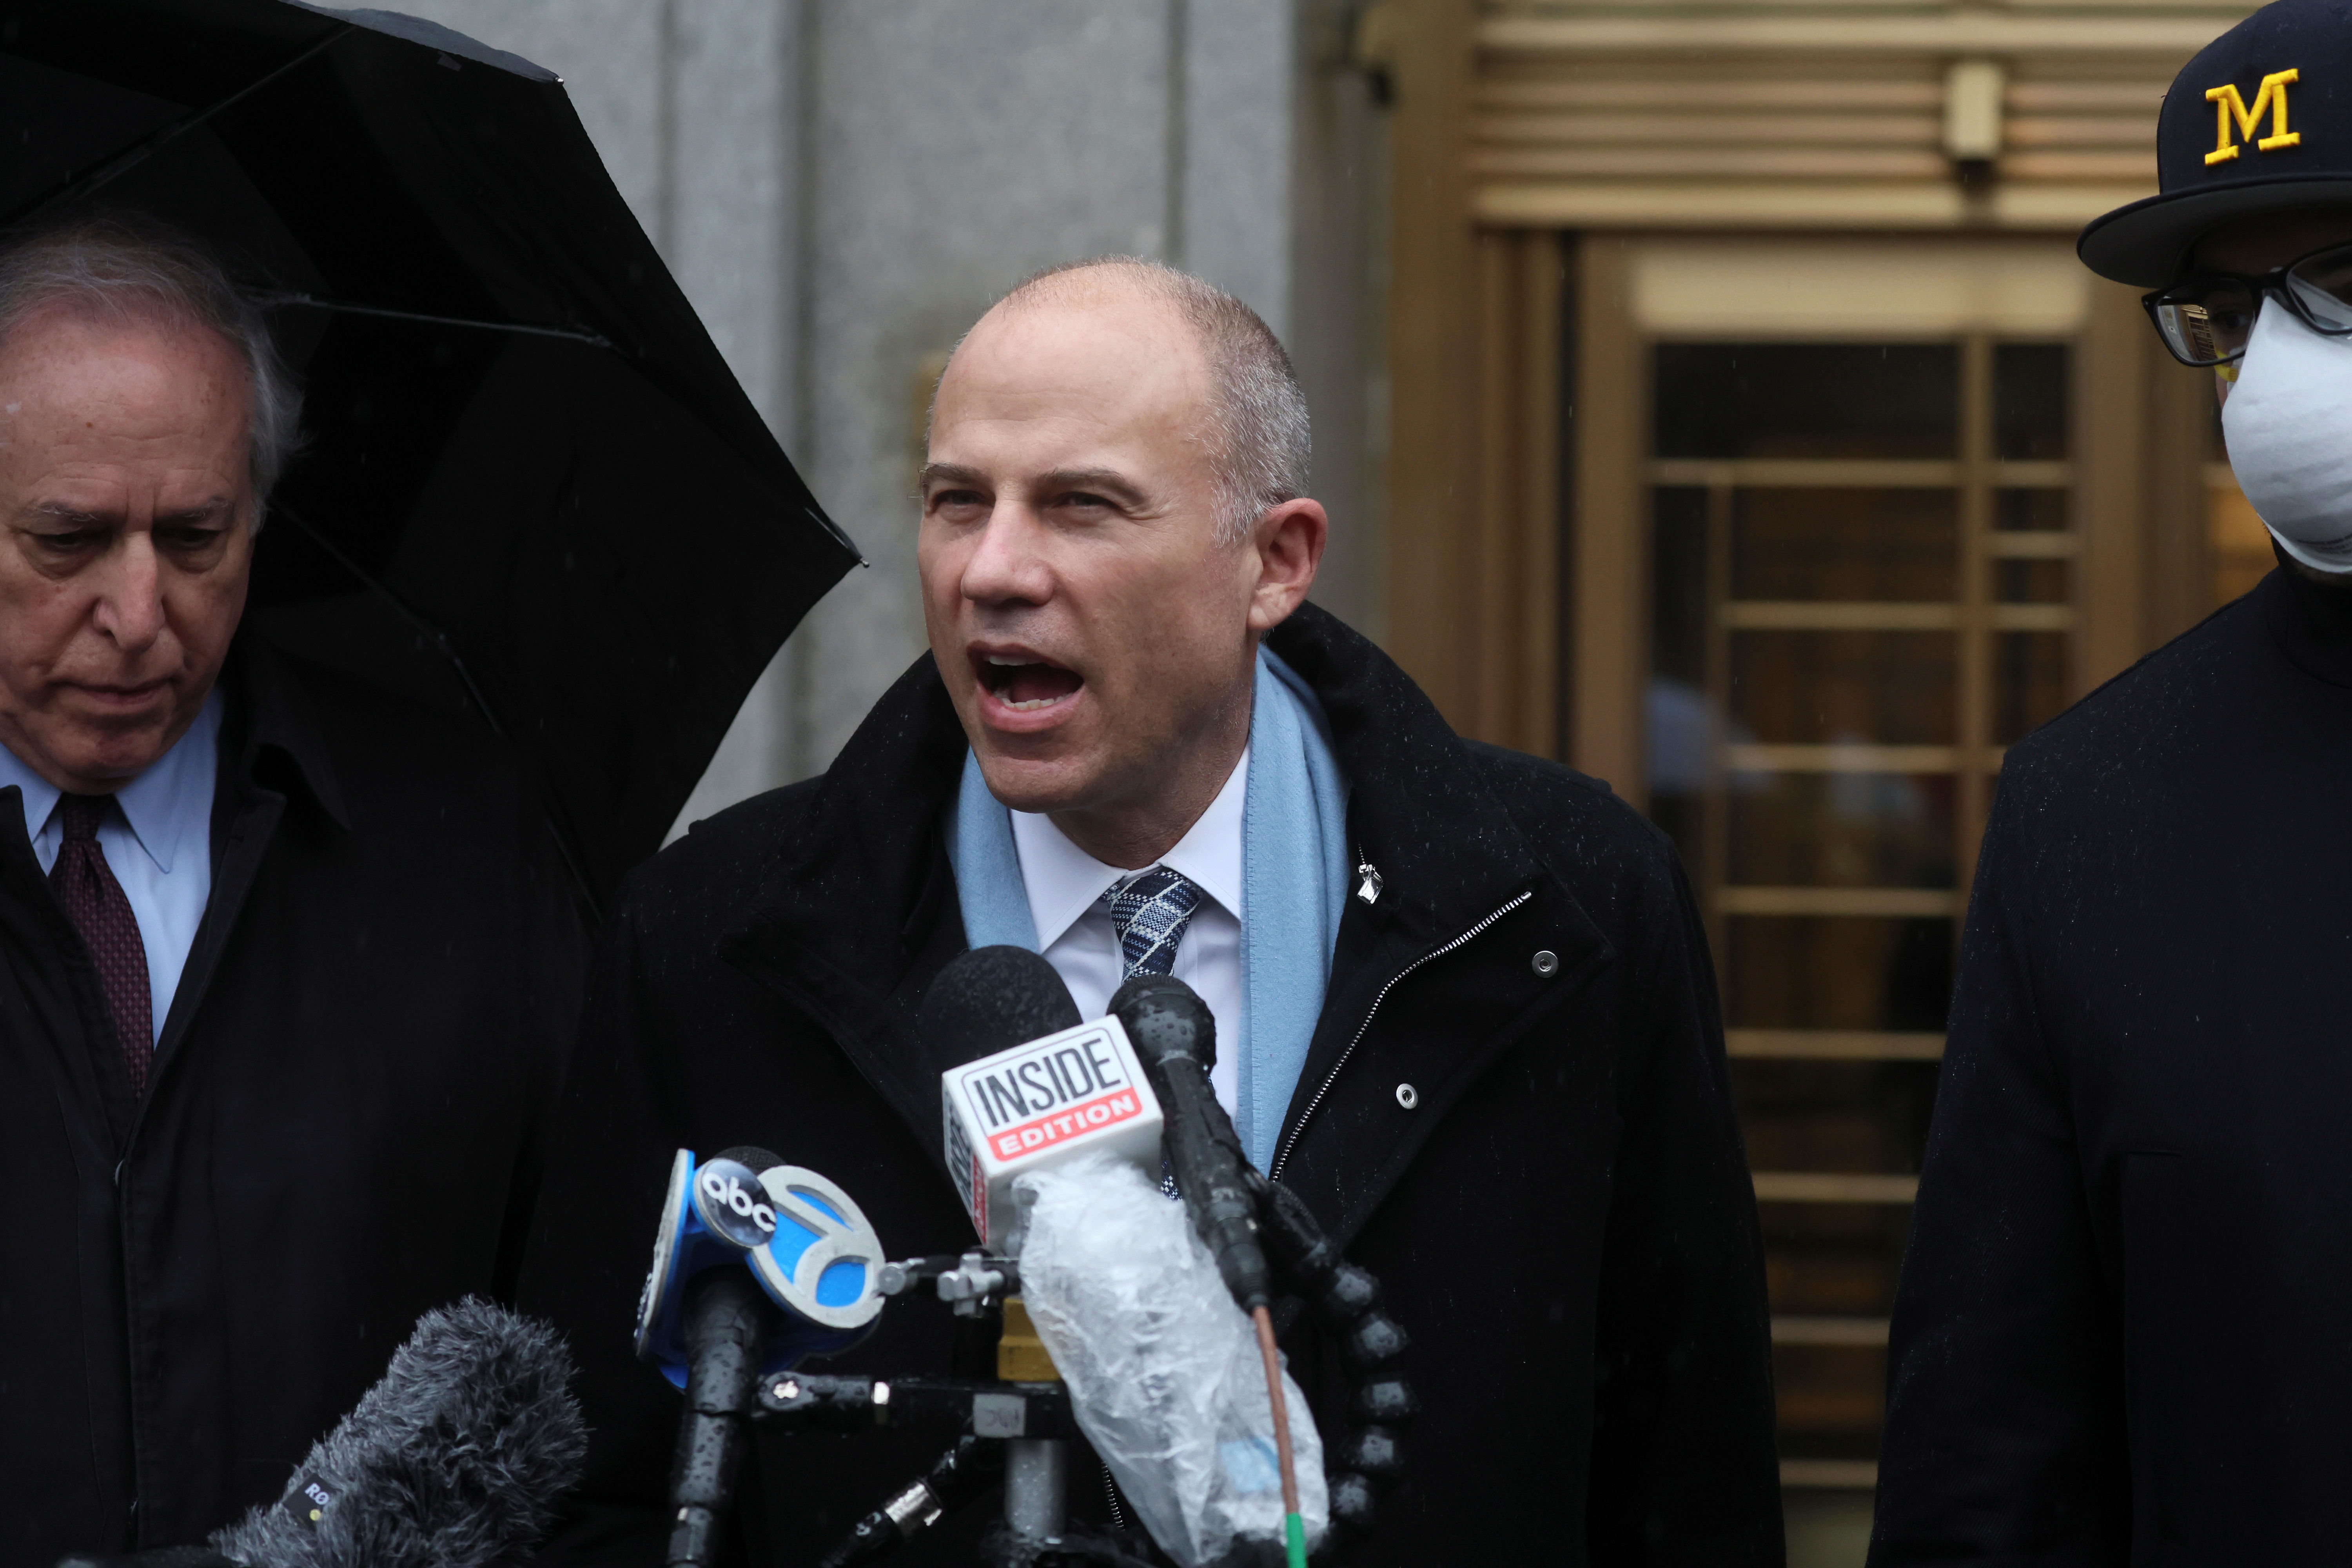 FILE PHOTO - Former attorney Michael Avenatti exits after the guilty verdict at the United States Courthouse in New York